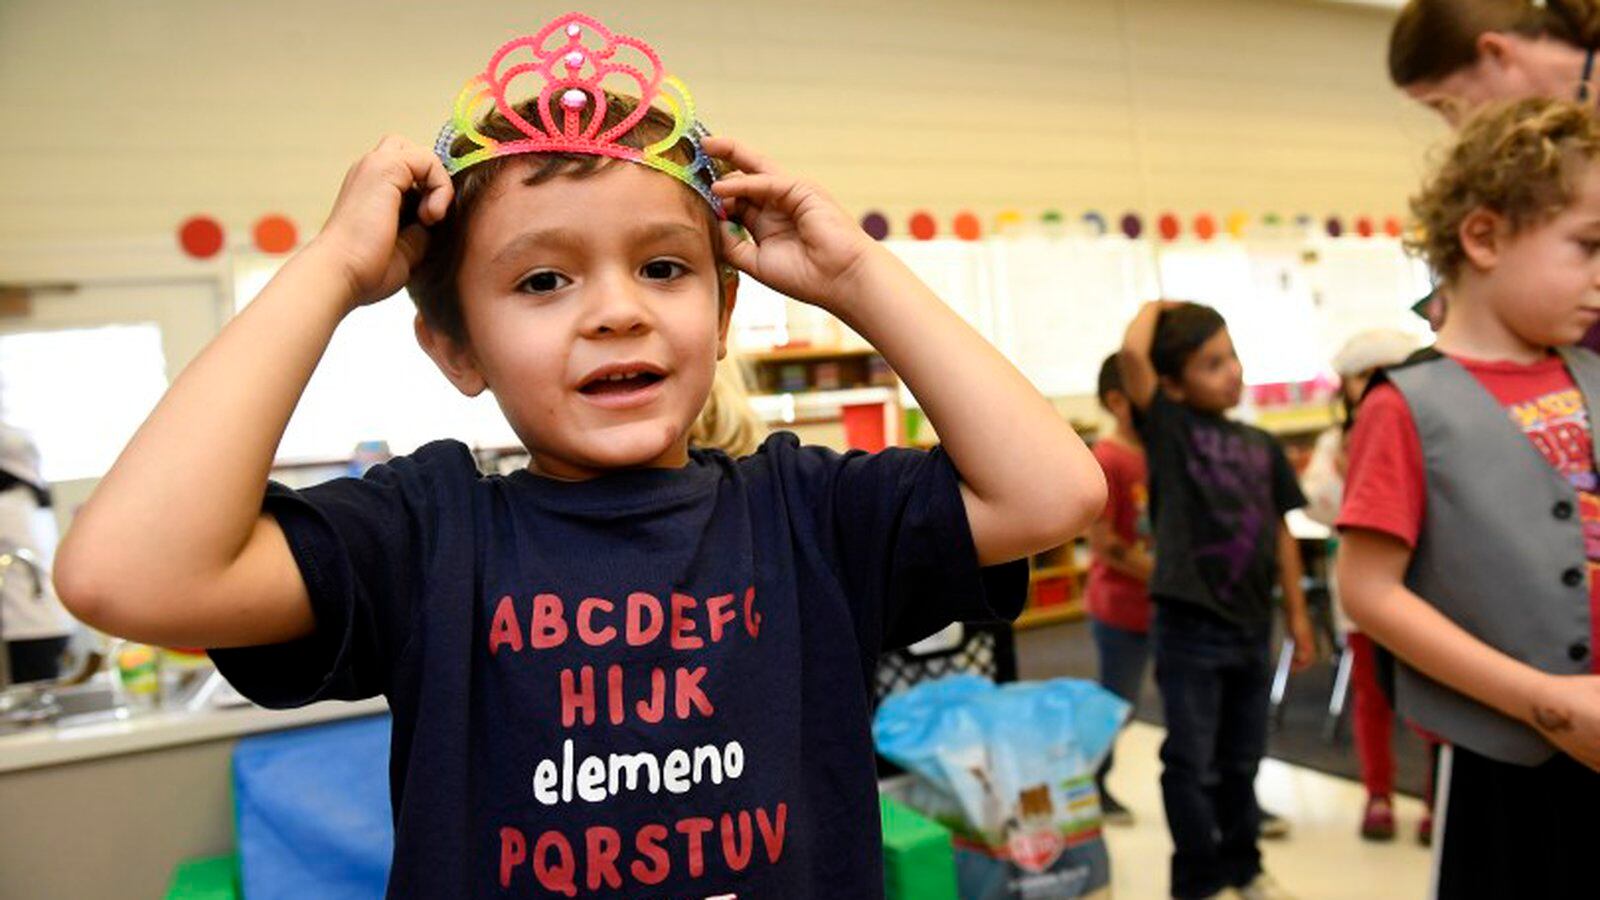 Ivan Ramirez Boyes, 5, plays dress-up during play time in the kindergarten class of Jenny Magee at University Hill Elementary School in Boulder.